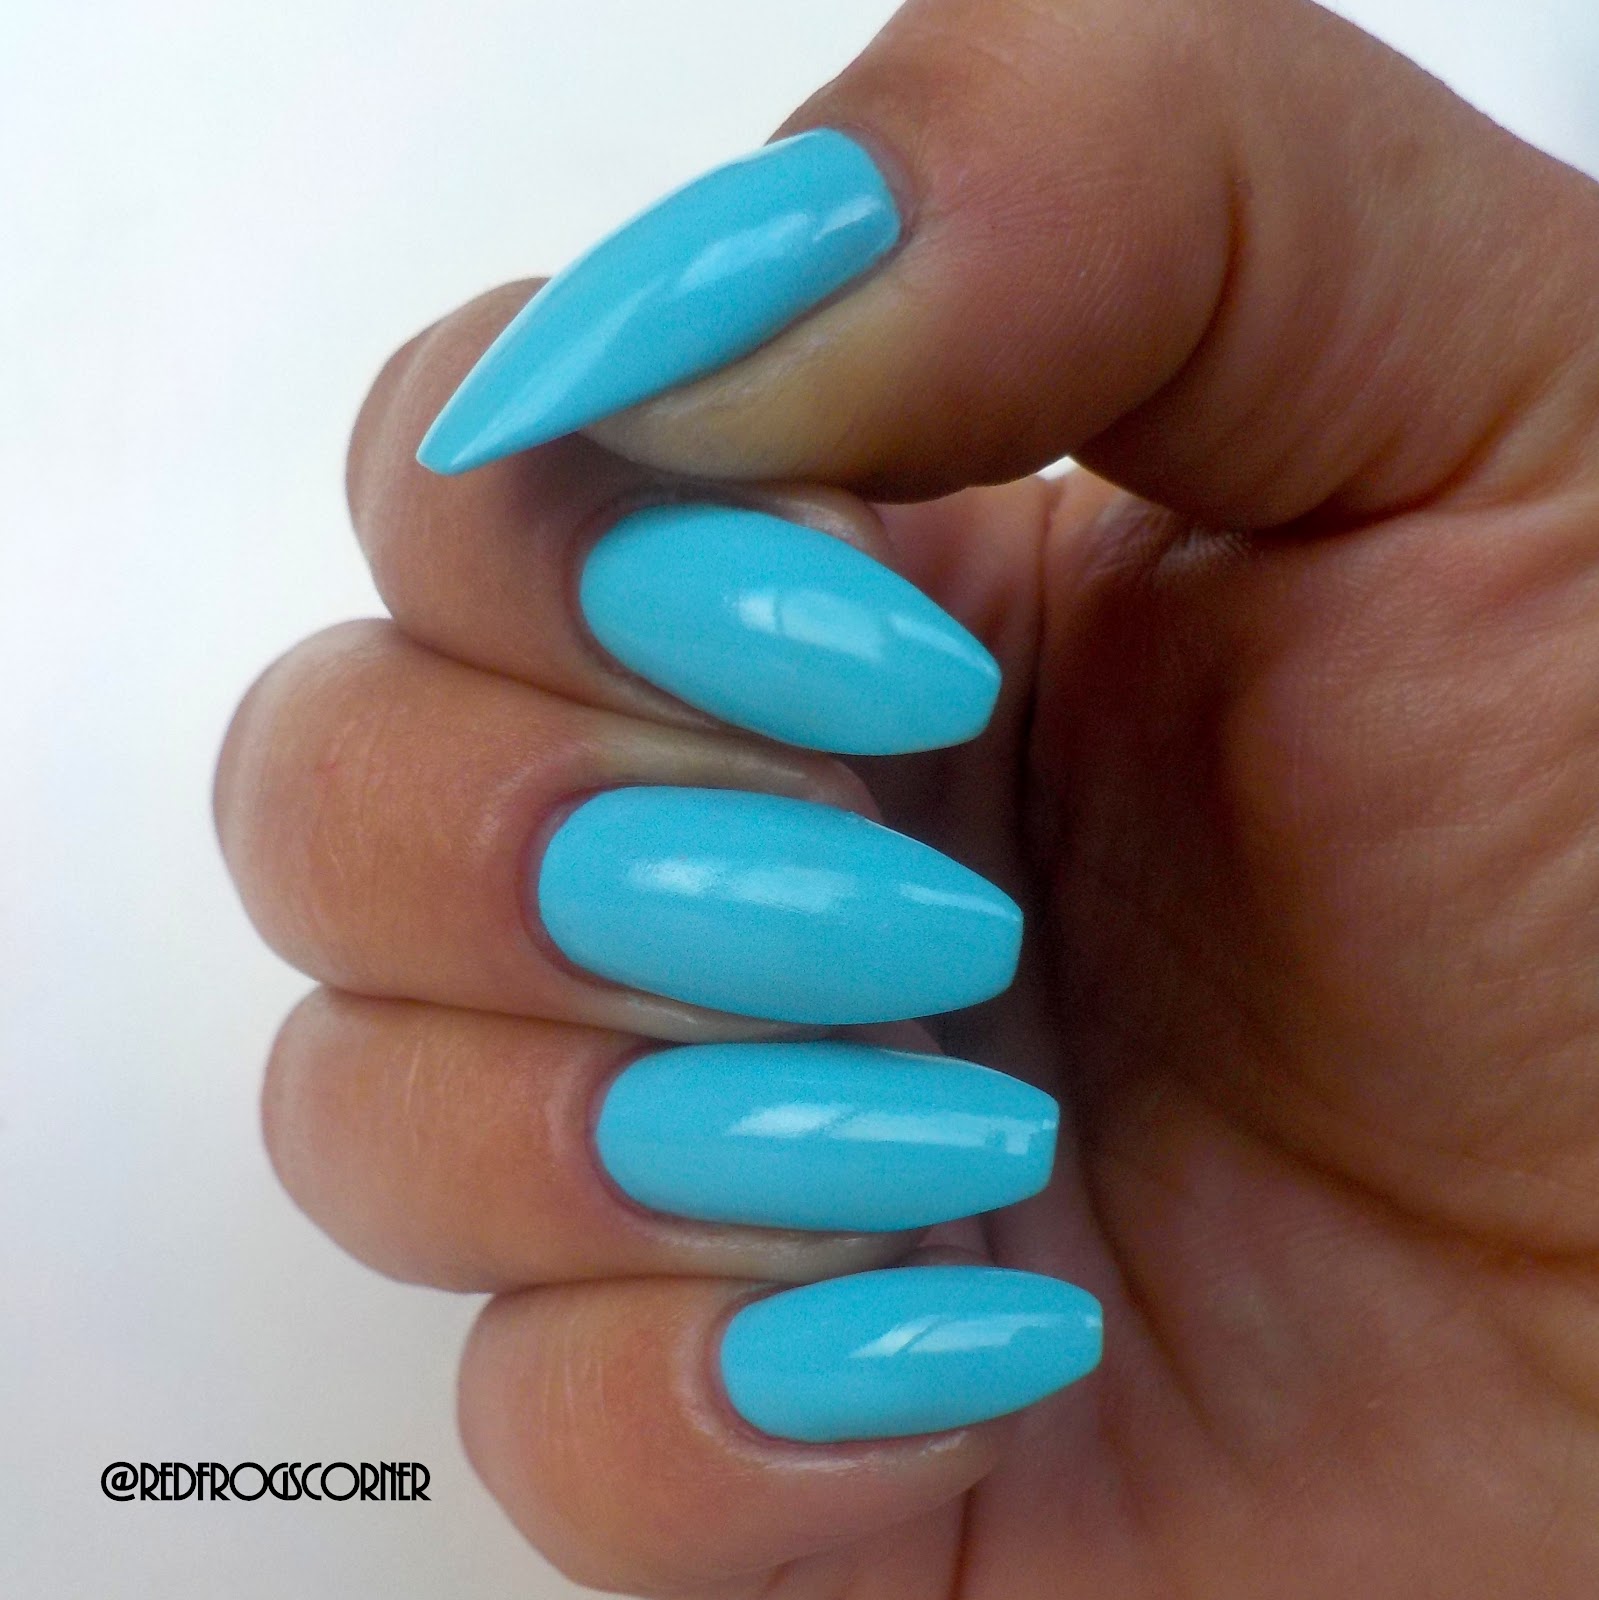 Red polish or bad polish?: Baby Blue Nails with BELL HYPOAllergenic